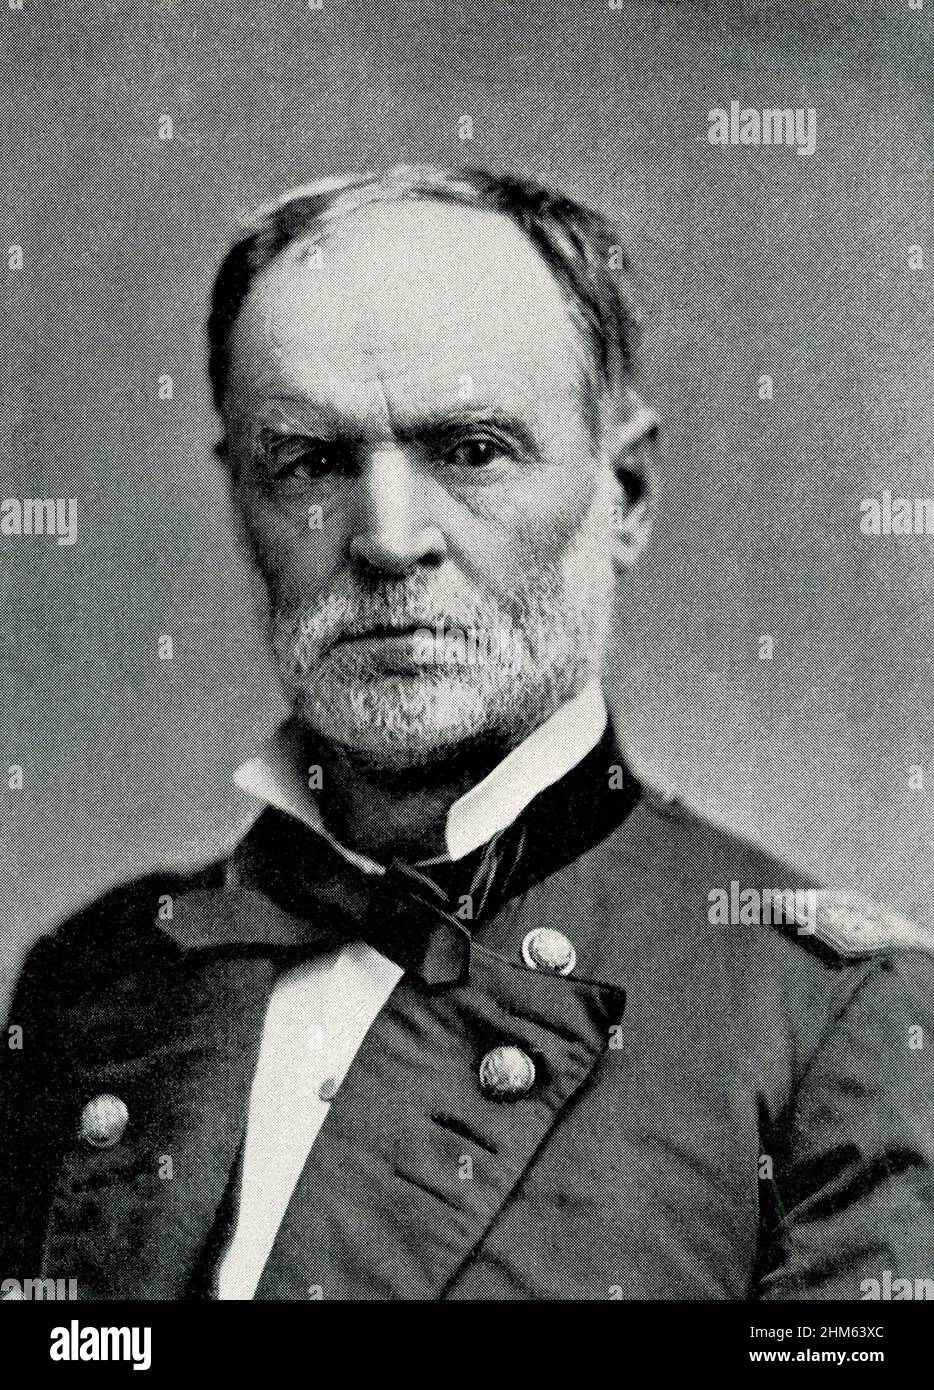 William Tecumseh Sherman (1820-1891) was an American Civil War general and a major architect of modern warfare. He led Union forces in crushing campaigns through the South, marching through Georgia and the Carolinas (1864–65). Stock Photo